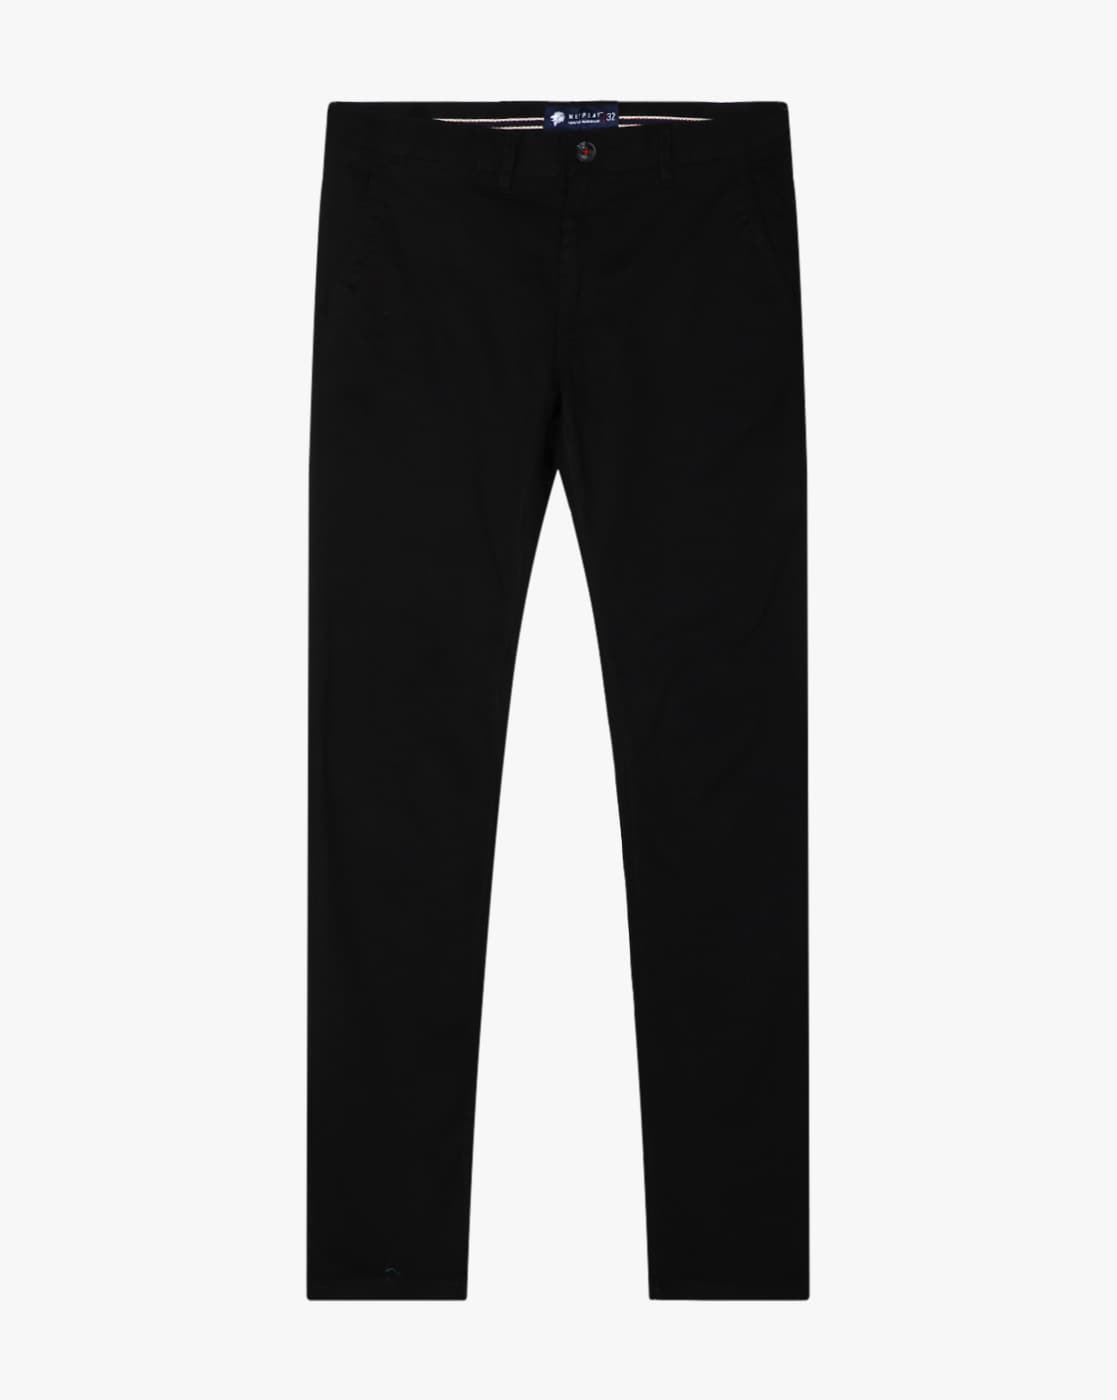 Dress Code Slim Fit Ankle Length Dapper Trousers In Tweed Fabric – PENSHOPPE